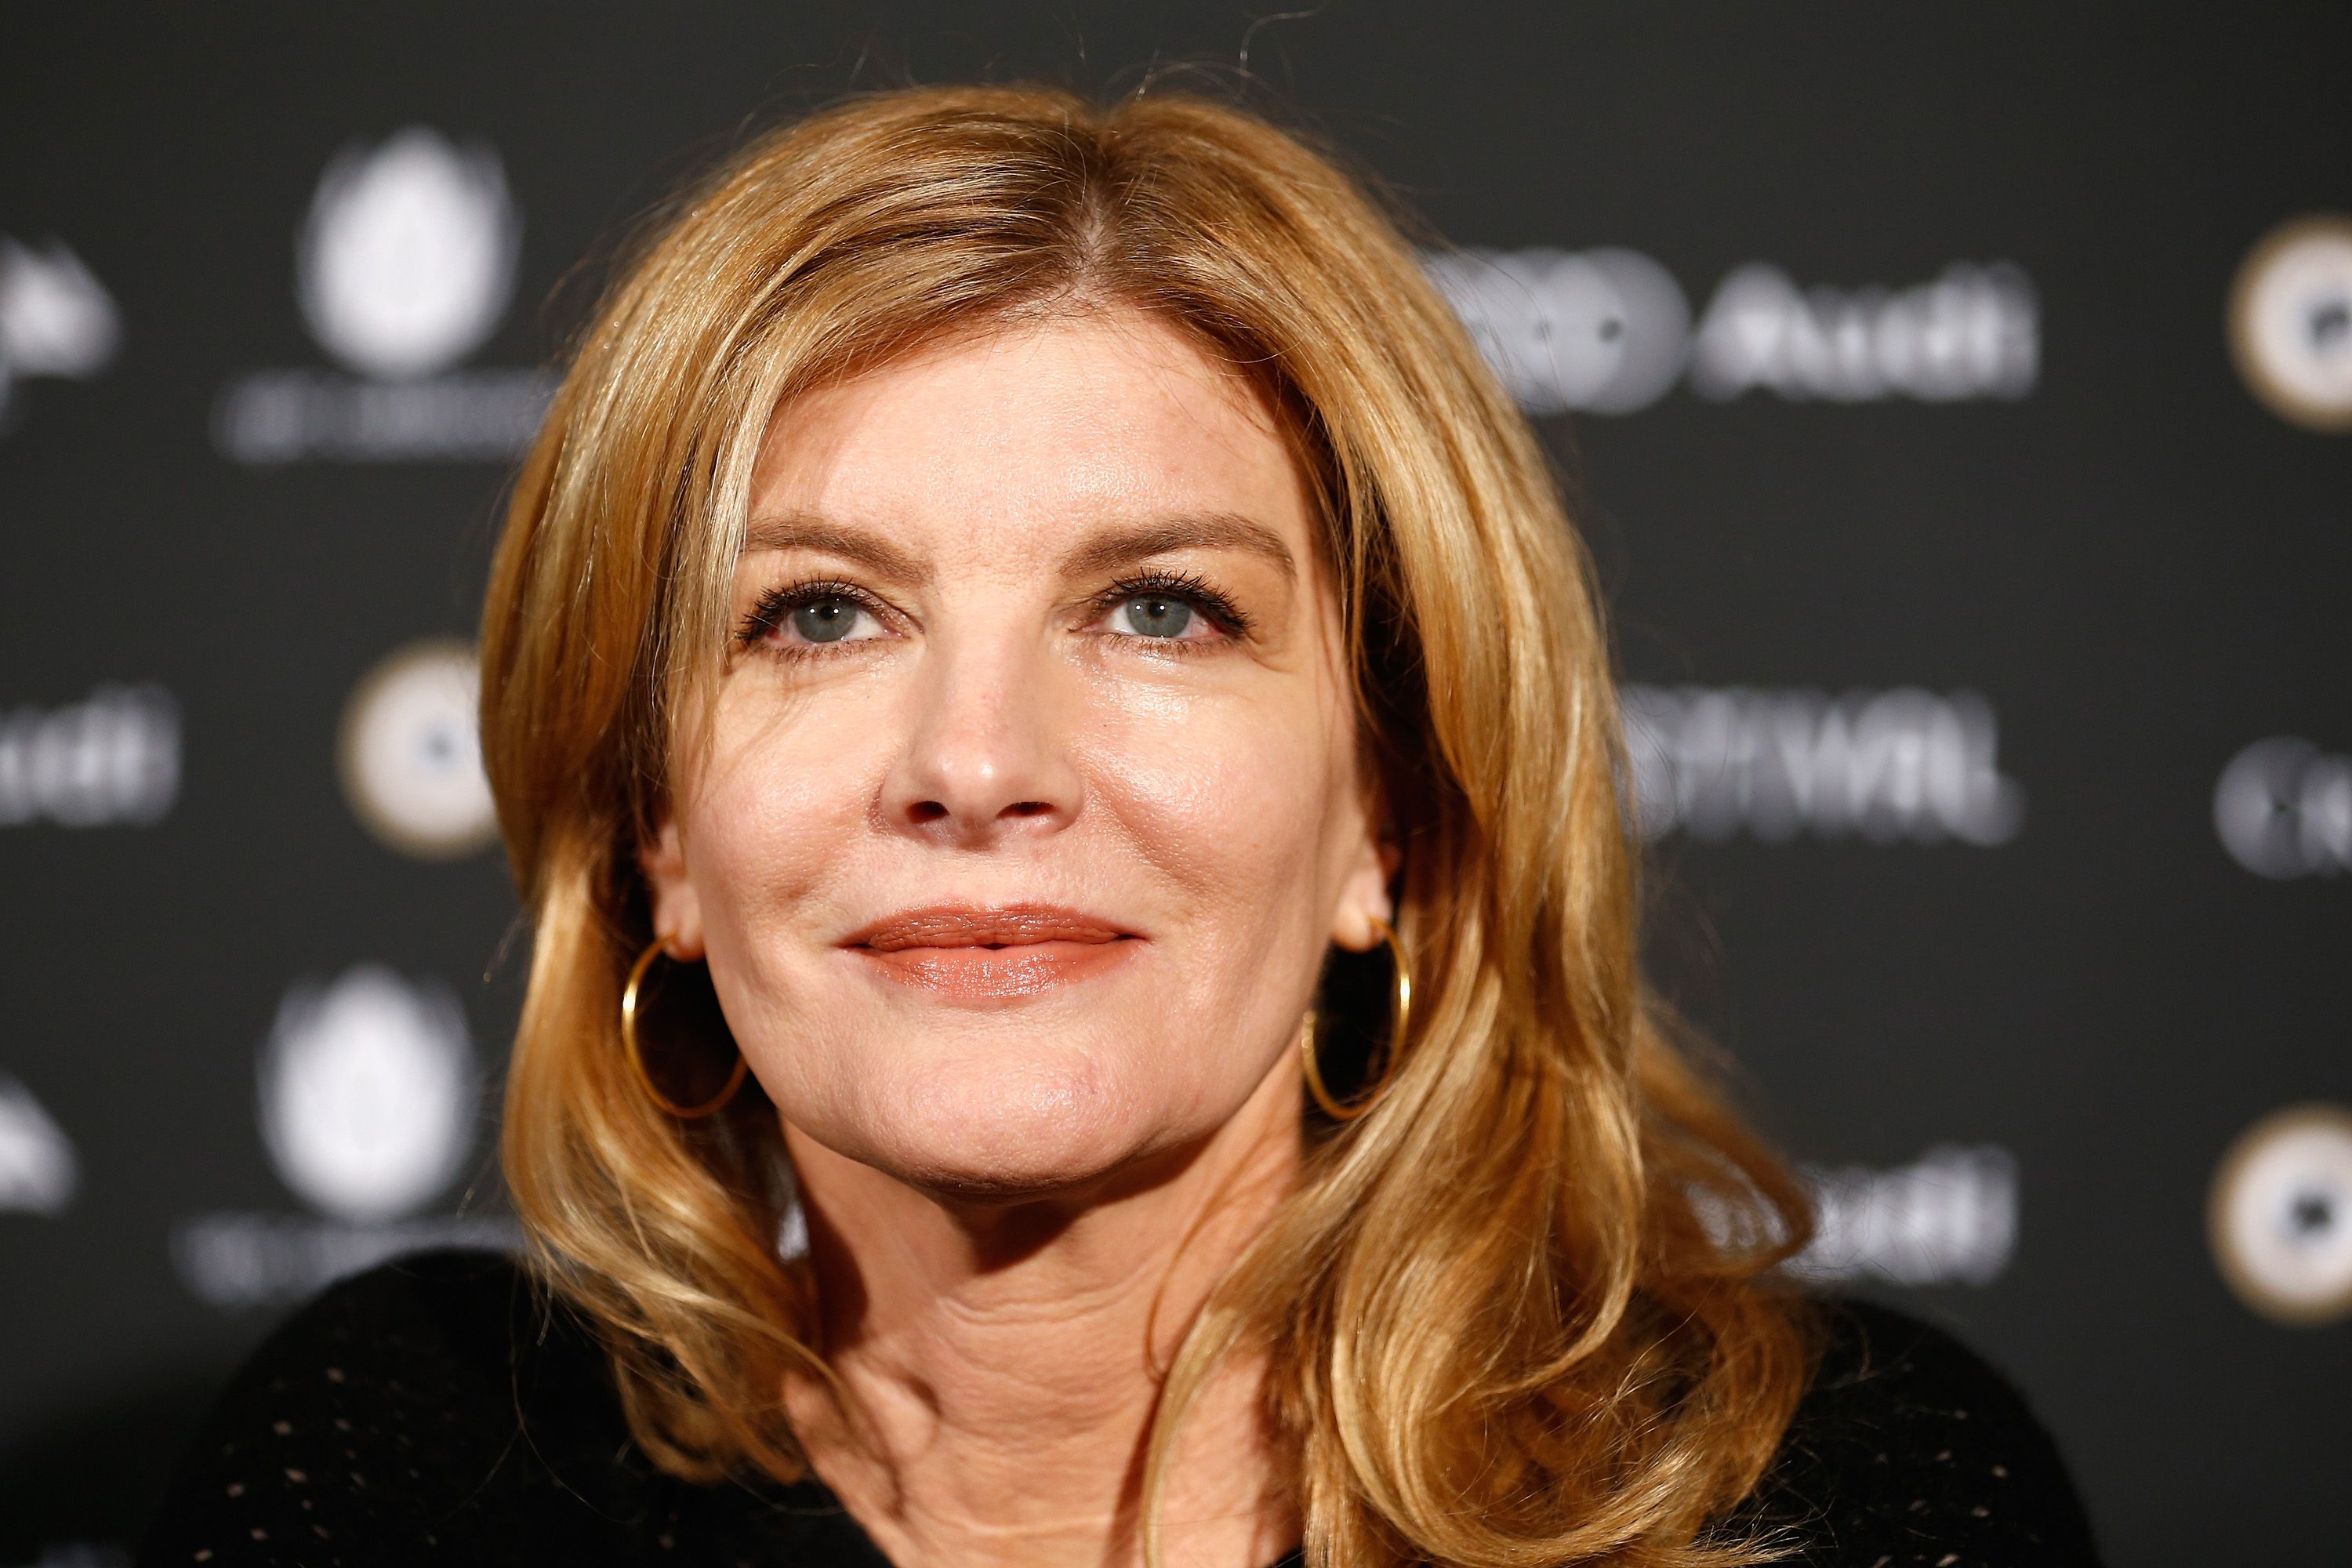 Rene Russo at the "Nightcrawler" press conference at the Zurich Film Festival in 2014 in Switzerland | Source: Getty Images